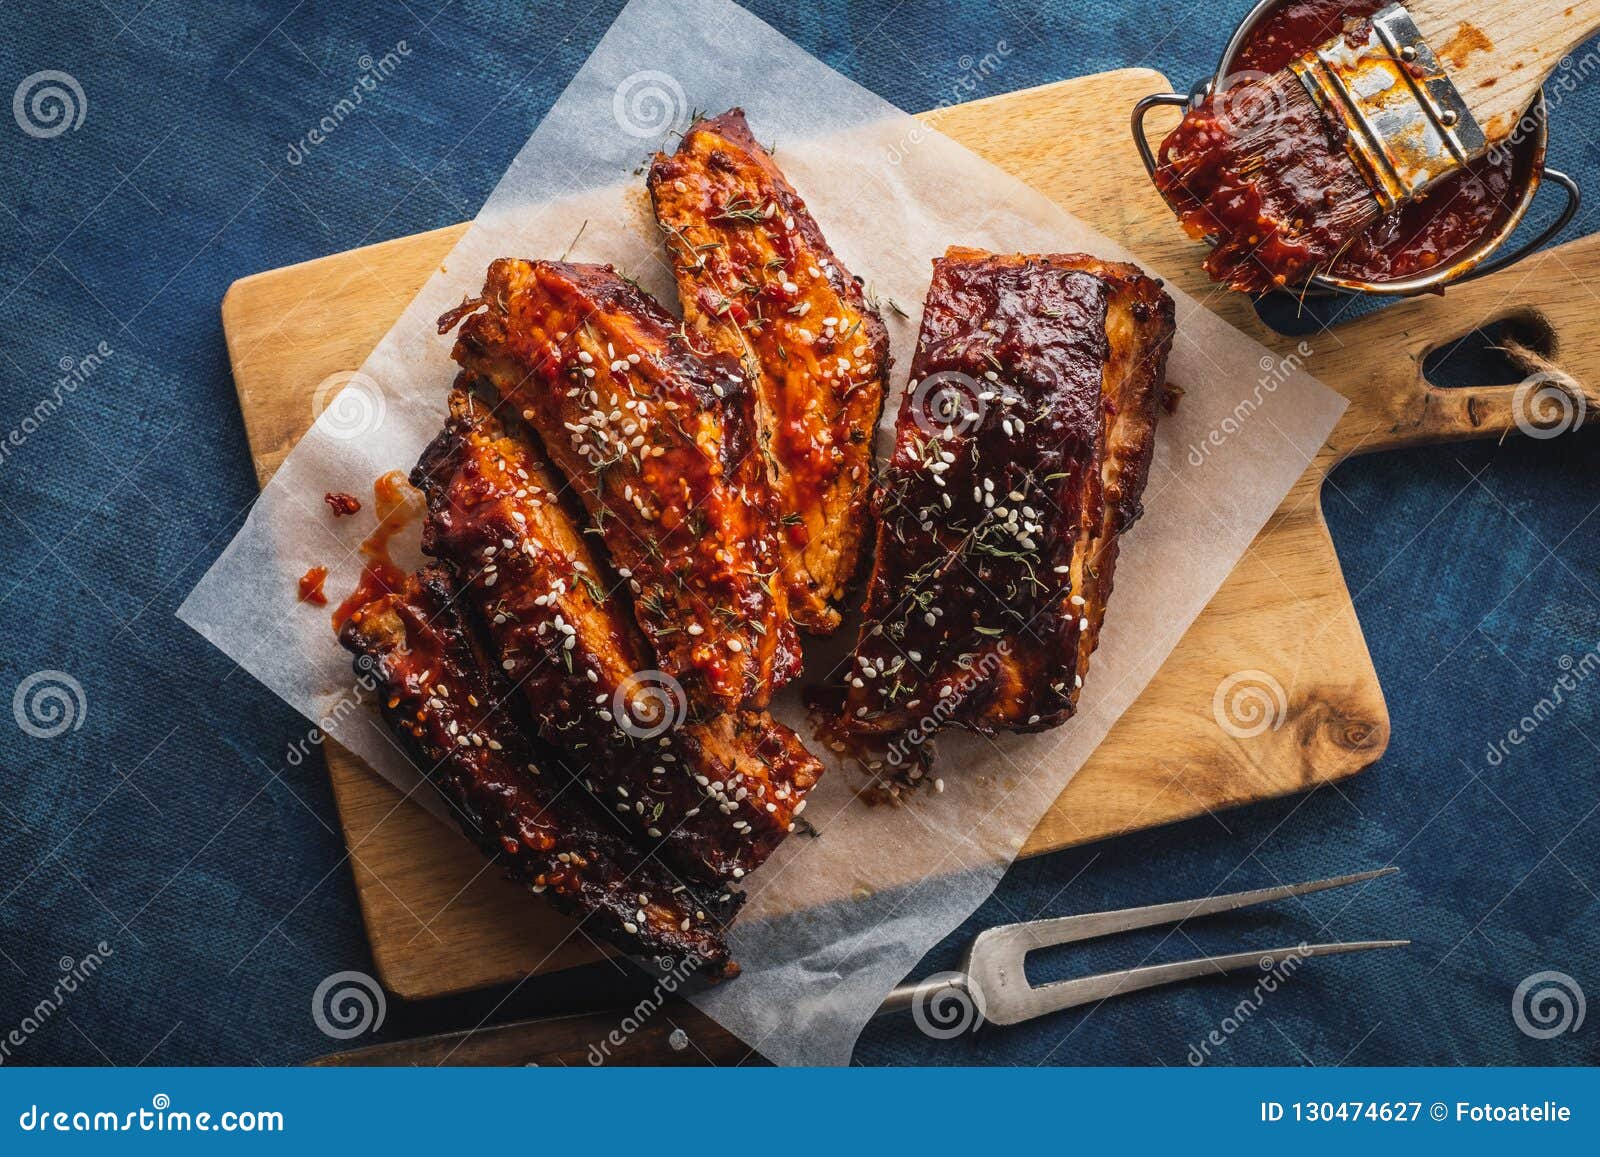 smoked roasted pork ribs over blue background. barbeque spicy ri